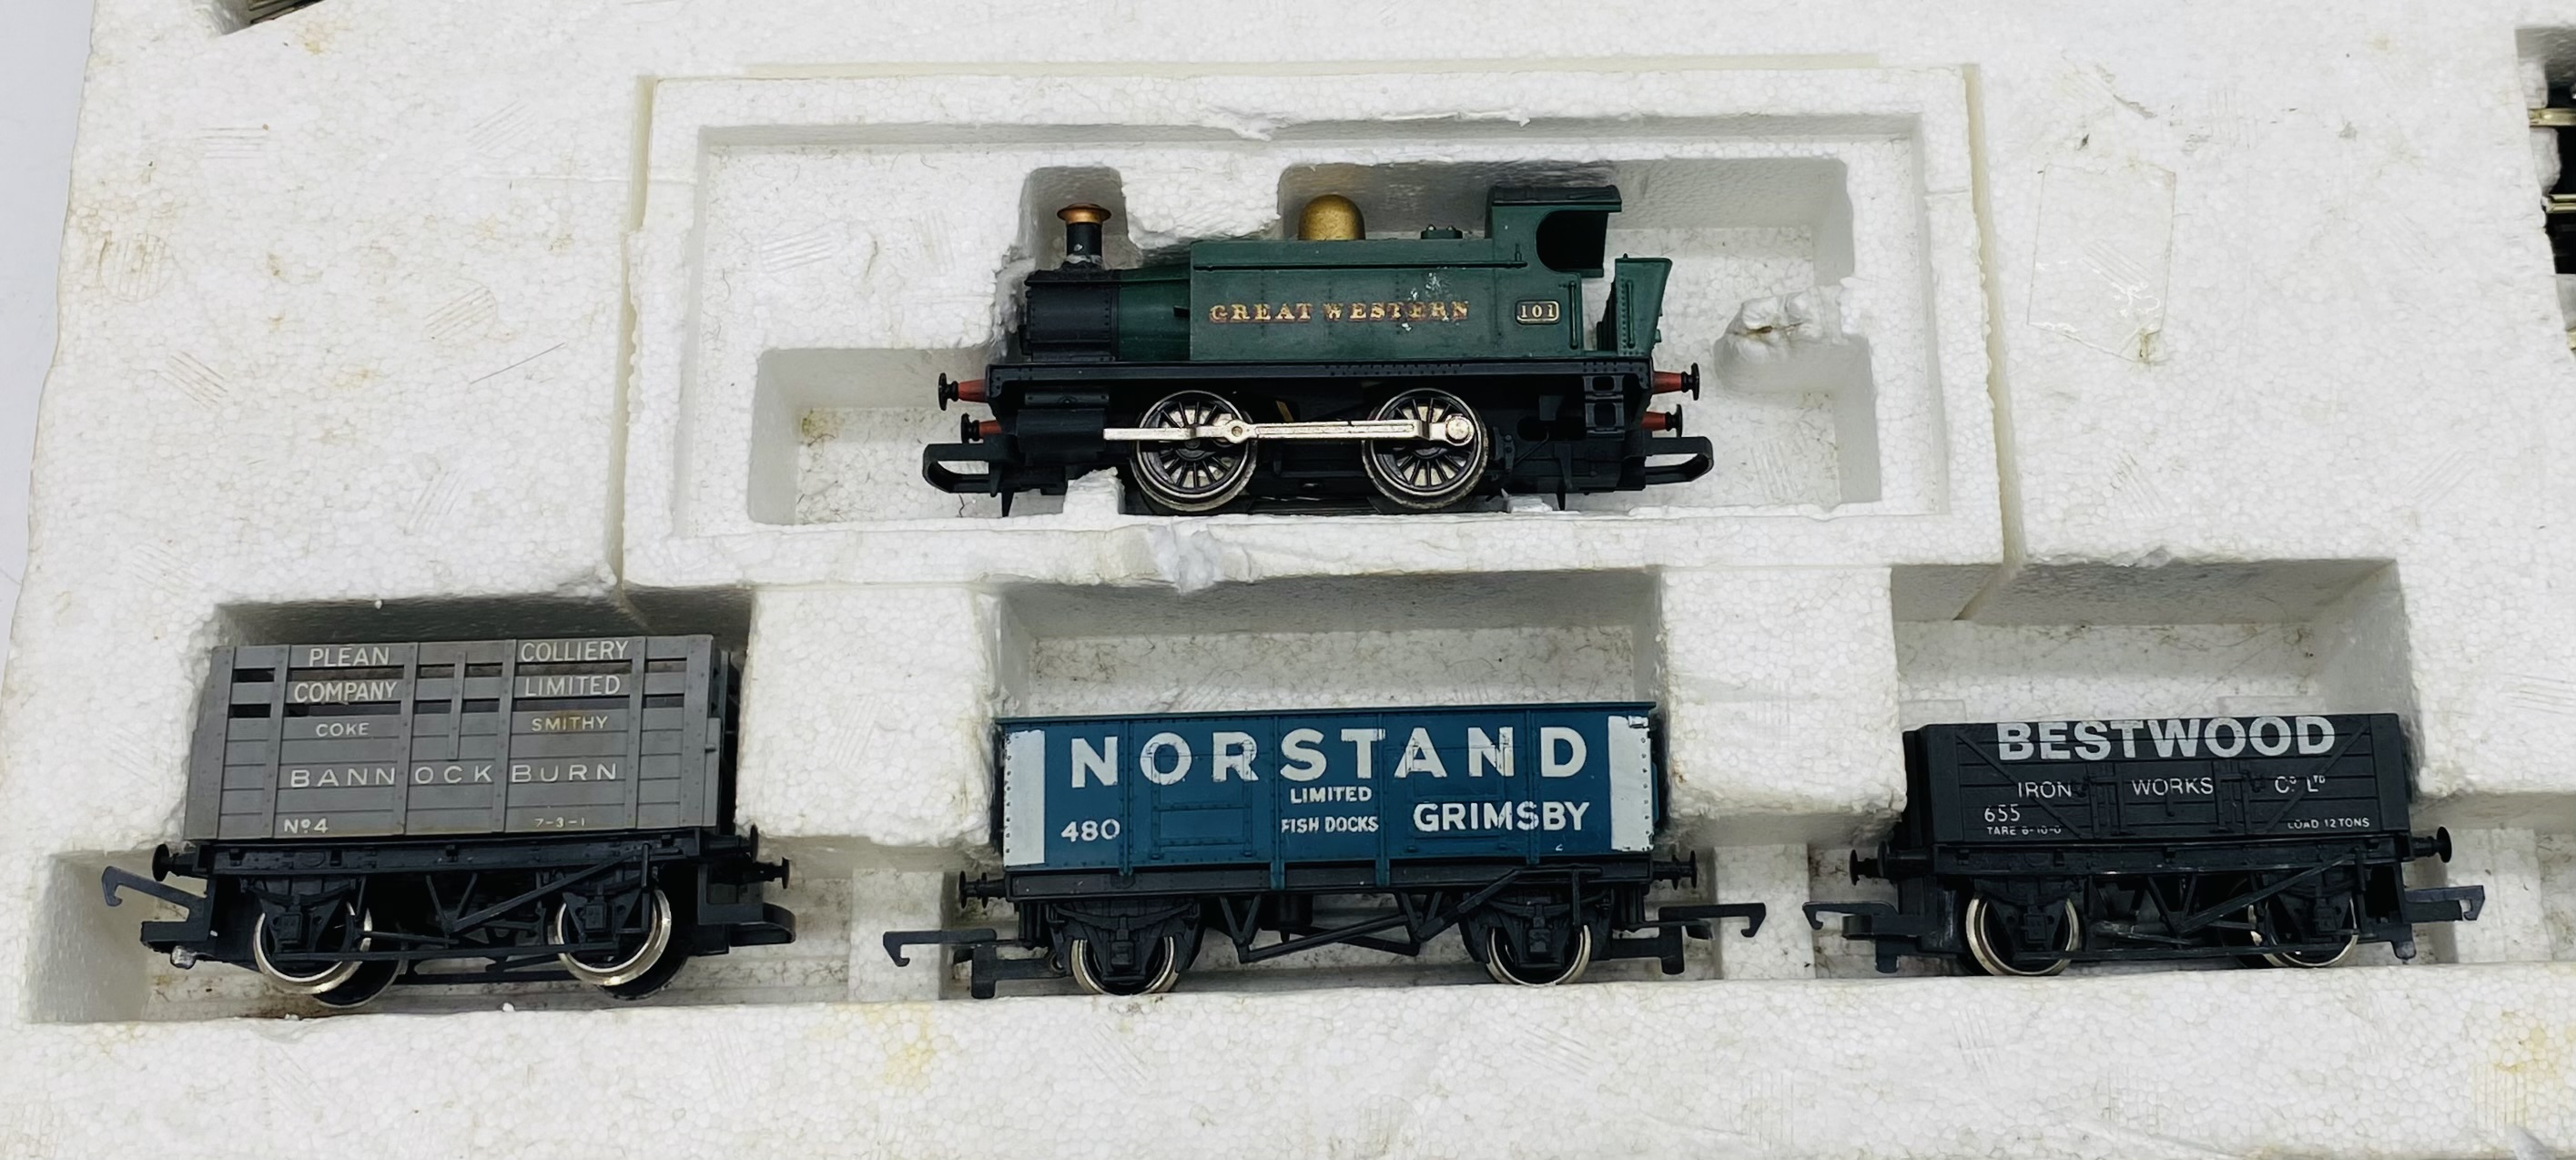 A collection of model railway OO gauge rolling stock, carriages, track and single locomotive. - Image 6 of 7